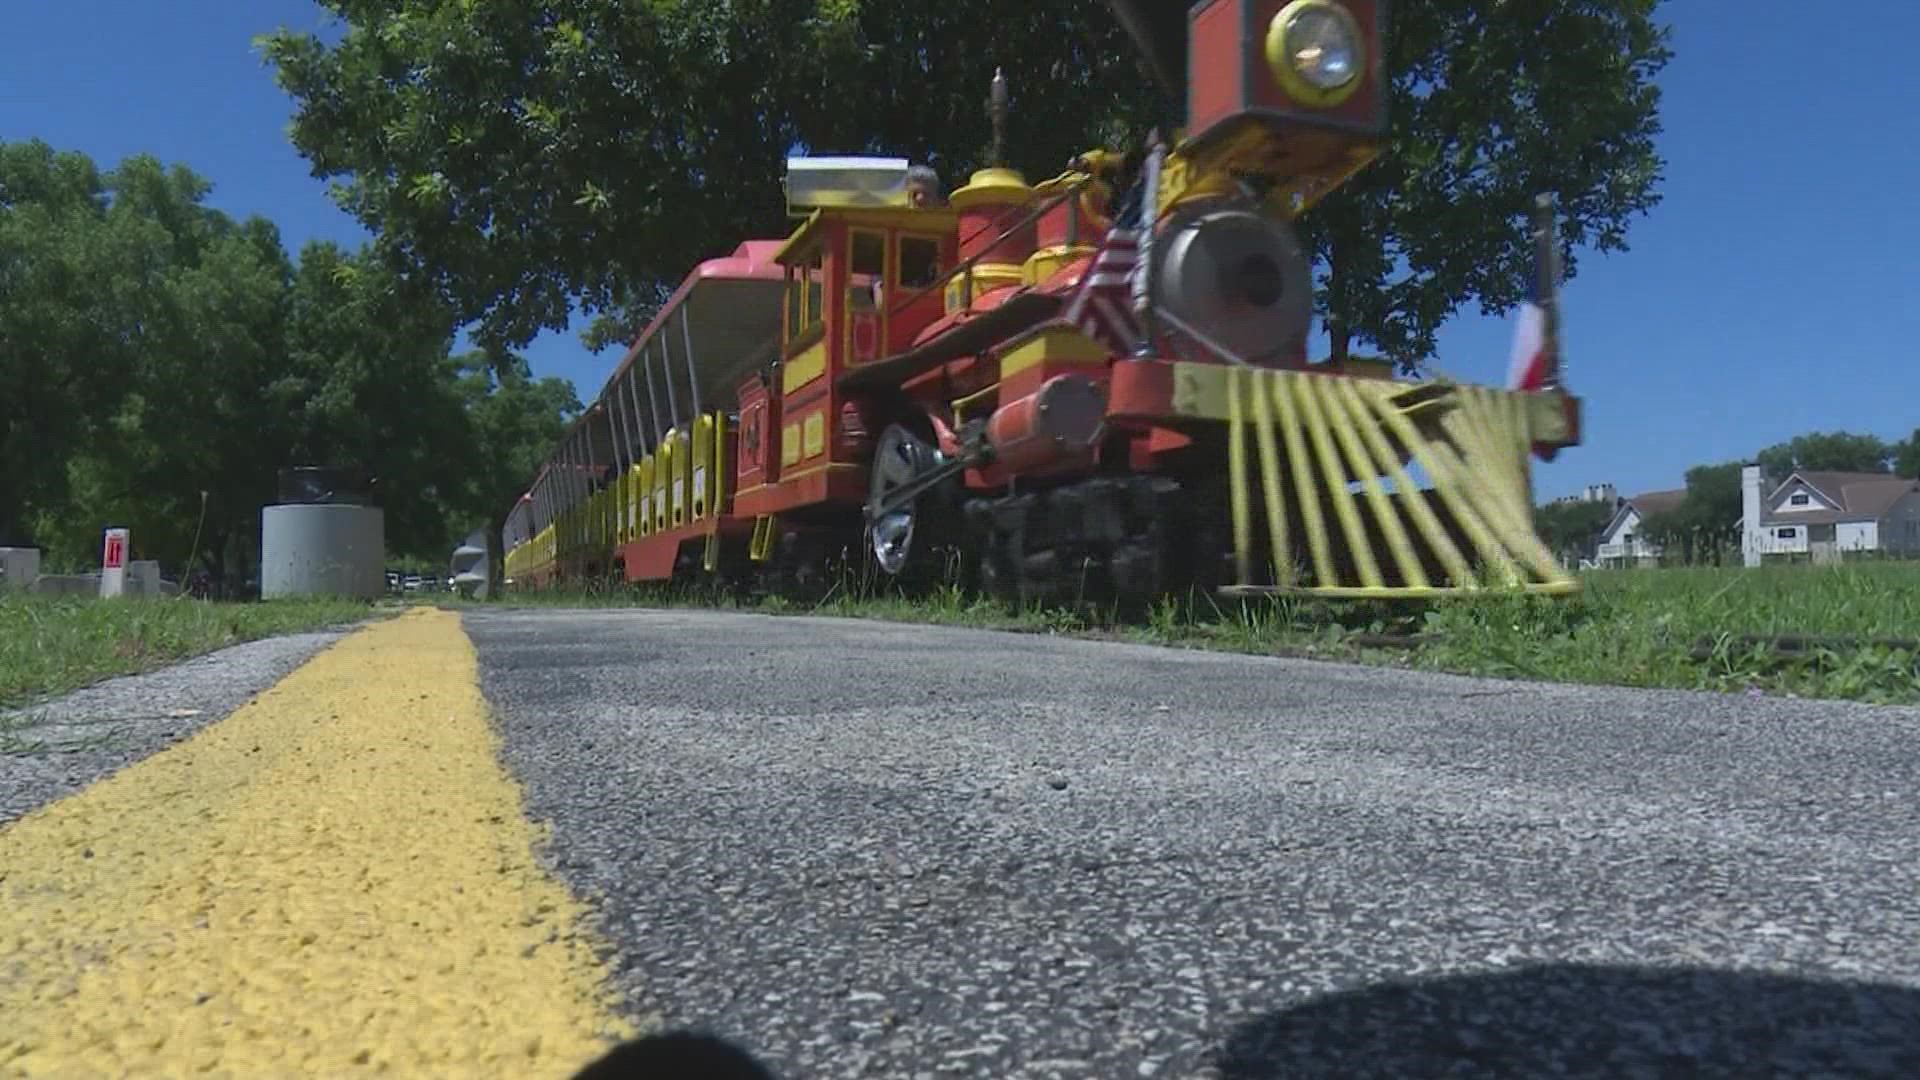 Since March of this year, the train has been tucked away, abandoned behind a gate. The city of Fort Worth has given the owner an ultimatum.